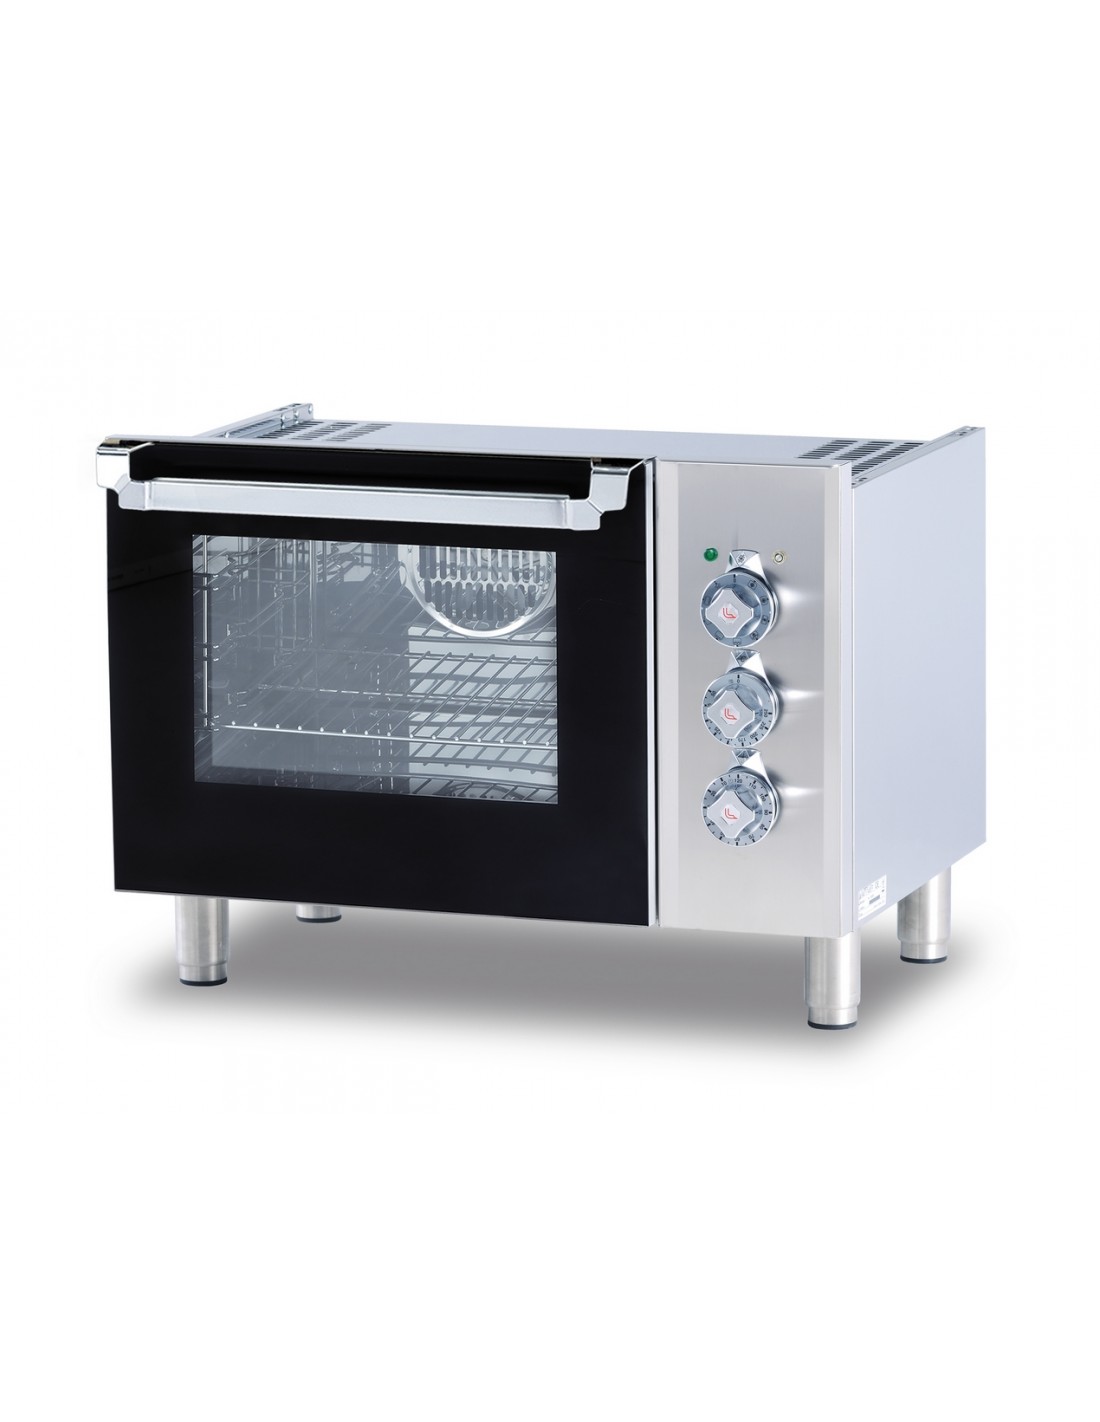 Base unit with multifunction electric oven - Grid n°1 cm 41 x 32.5 - Glass door - cm 80 x 57.5 x57h